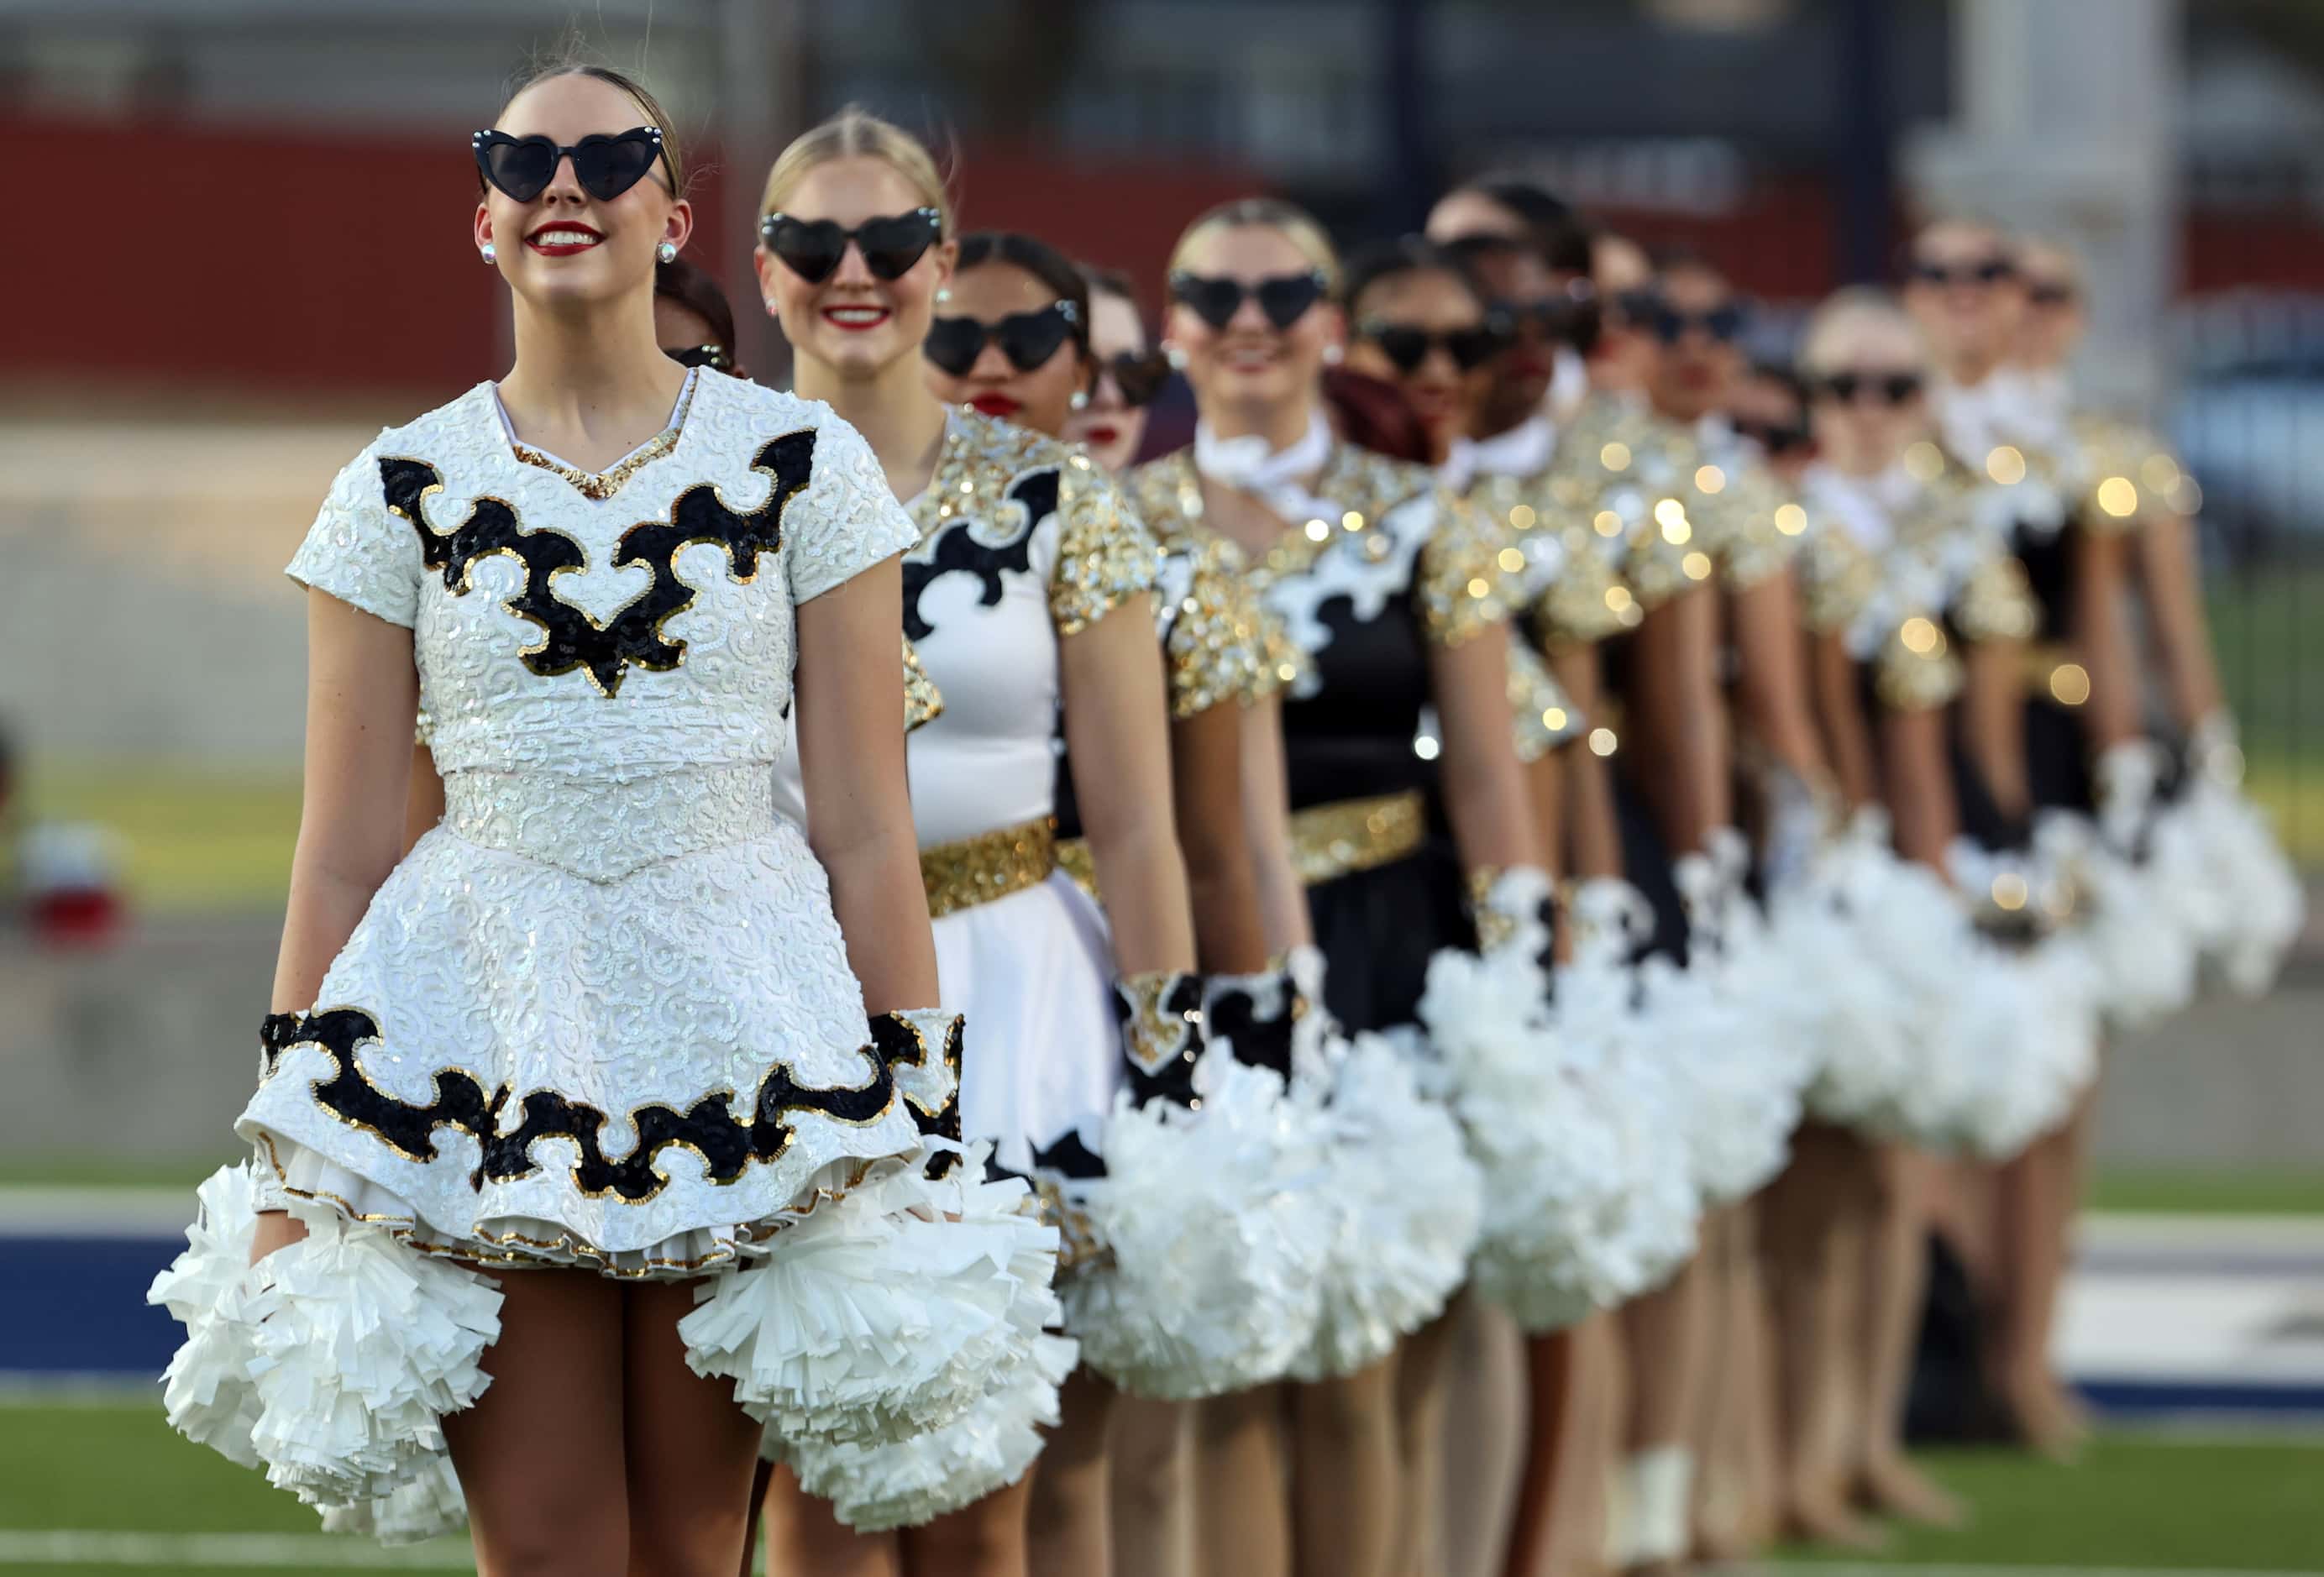 The Forney high drill team sports heart-shaped eyeglasses, while. Waiting for their team to...